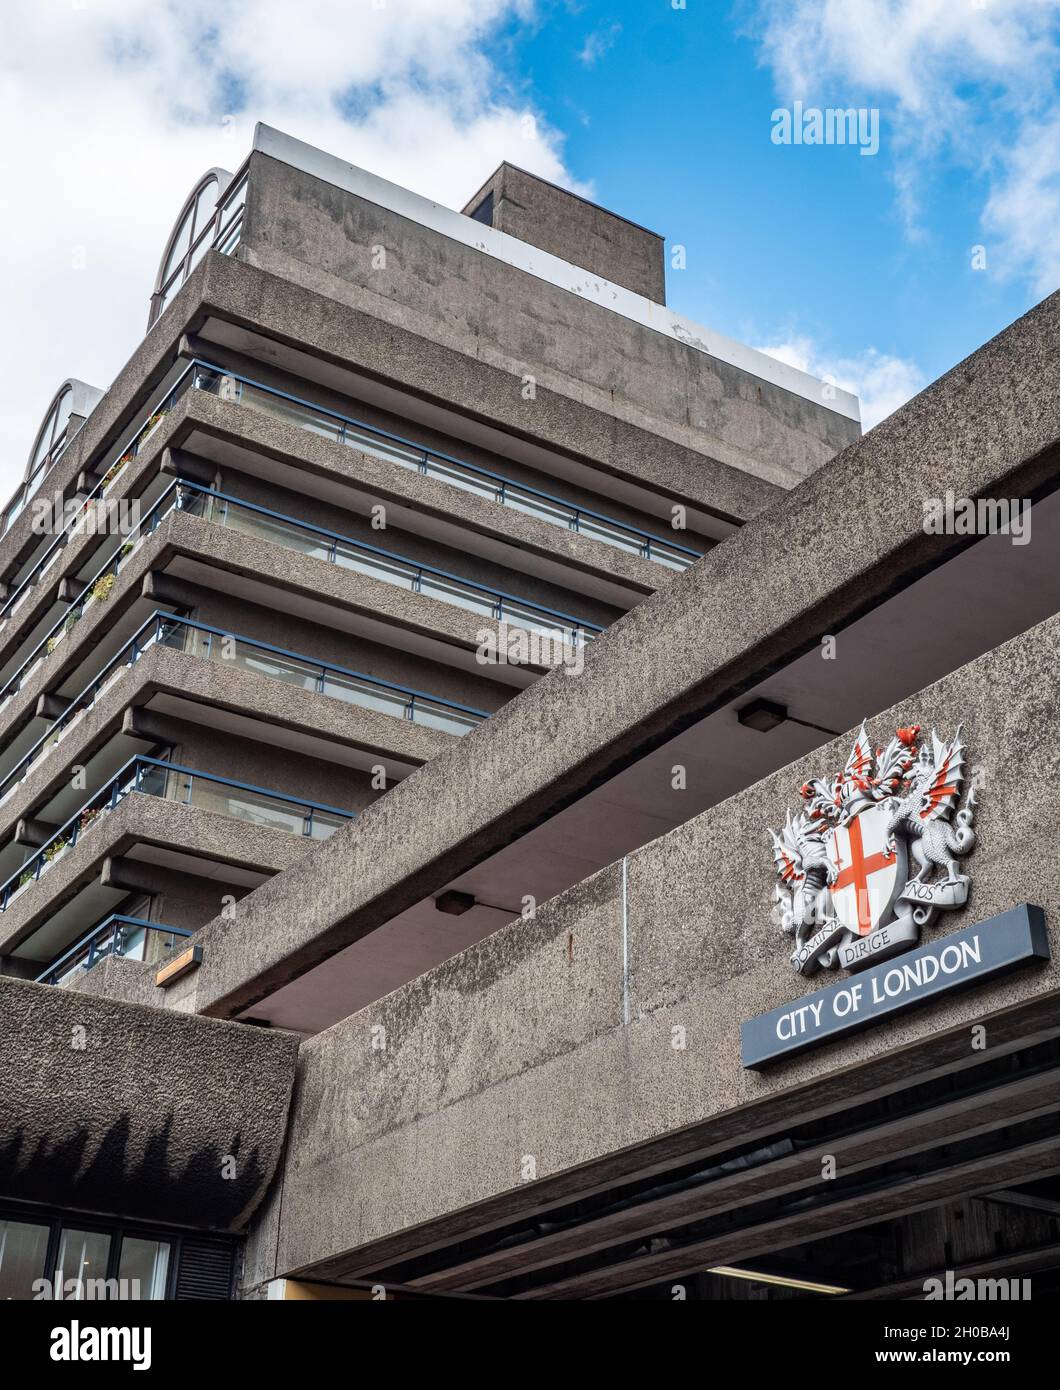 The Barbican Estate, London. The iconic brutalist concrete architecture of the inner city estate in the heart of the City of London, EC1. Stock Photo